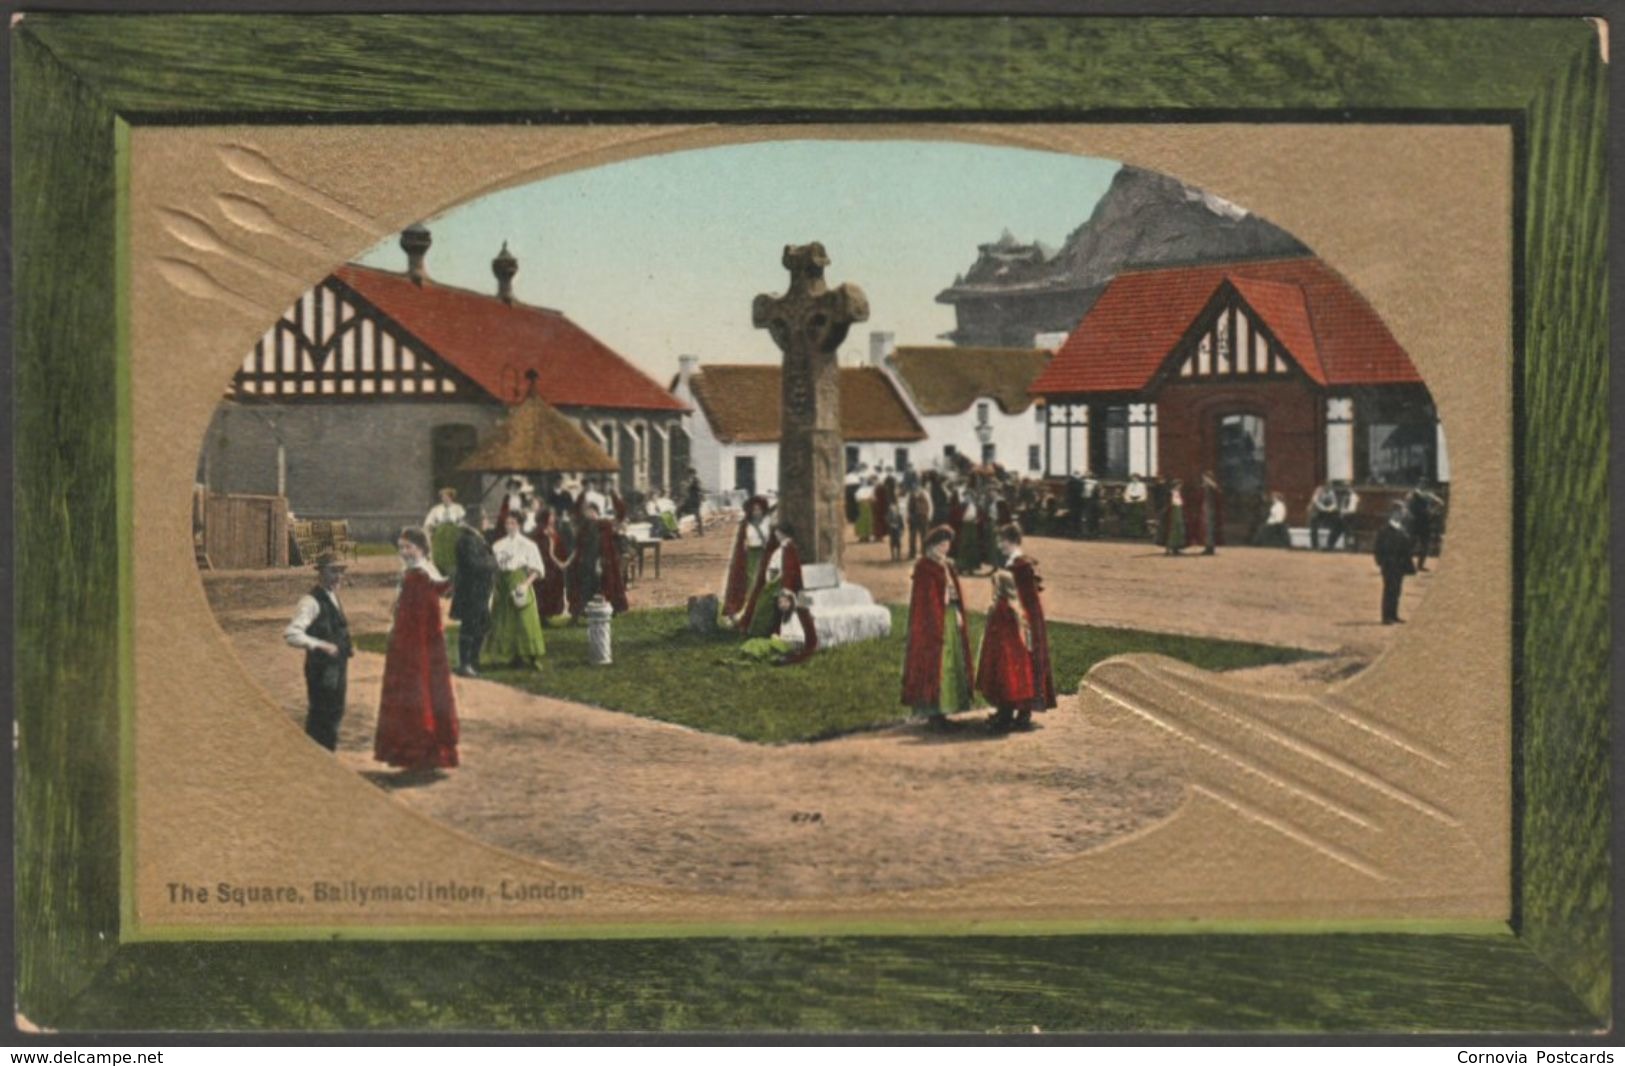 The Square, Ballymaclinton, Imperial International Exhibition, London, 1909 - Valentine's Postcard - Exhibitions